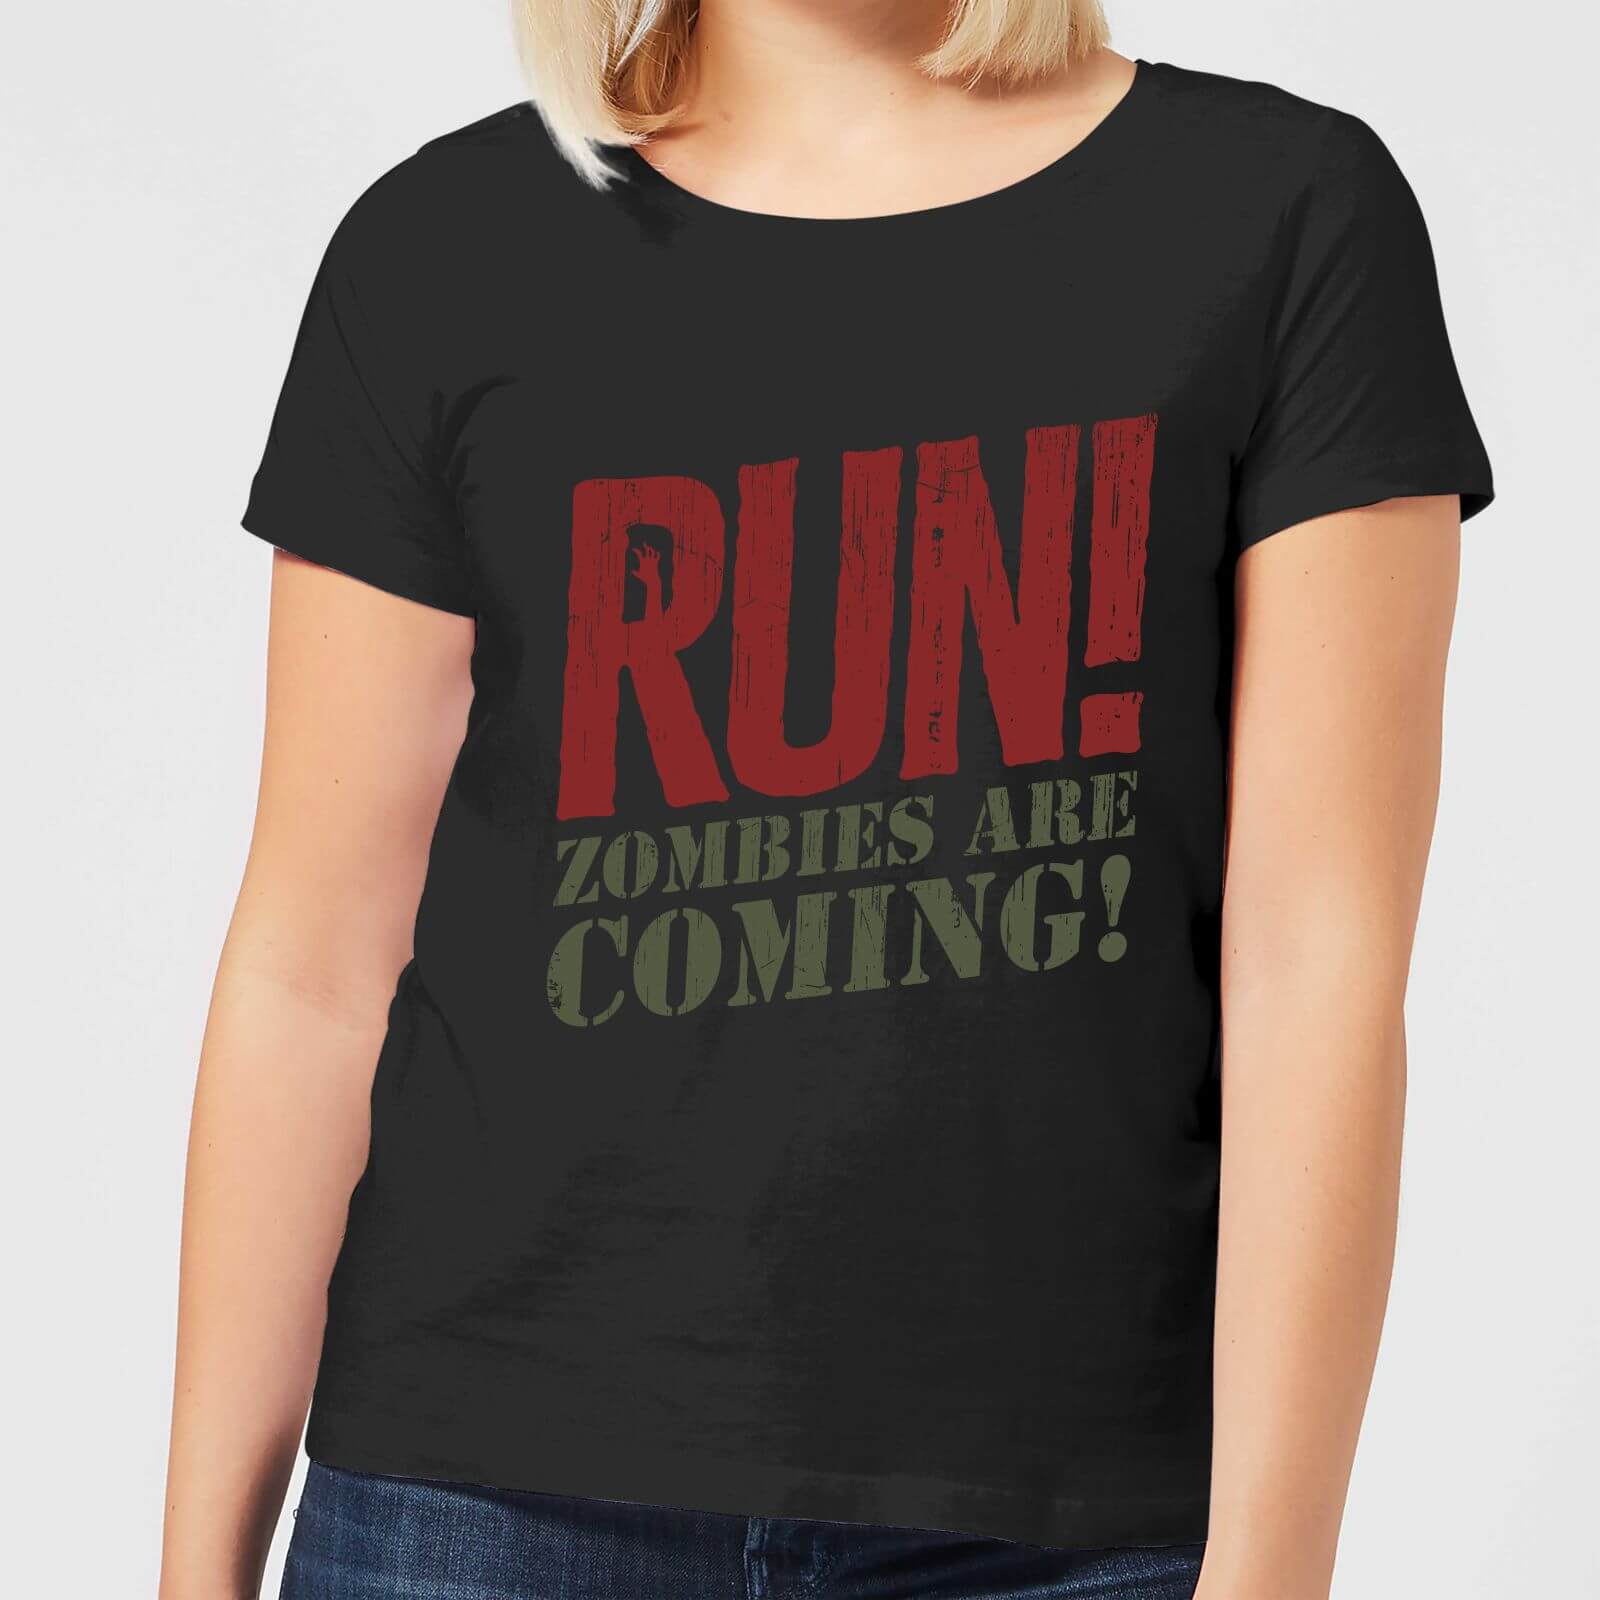 By IWOOT RUN! Zombies Are Coming! Women's T-Shirt - Black - 4XL - Black